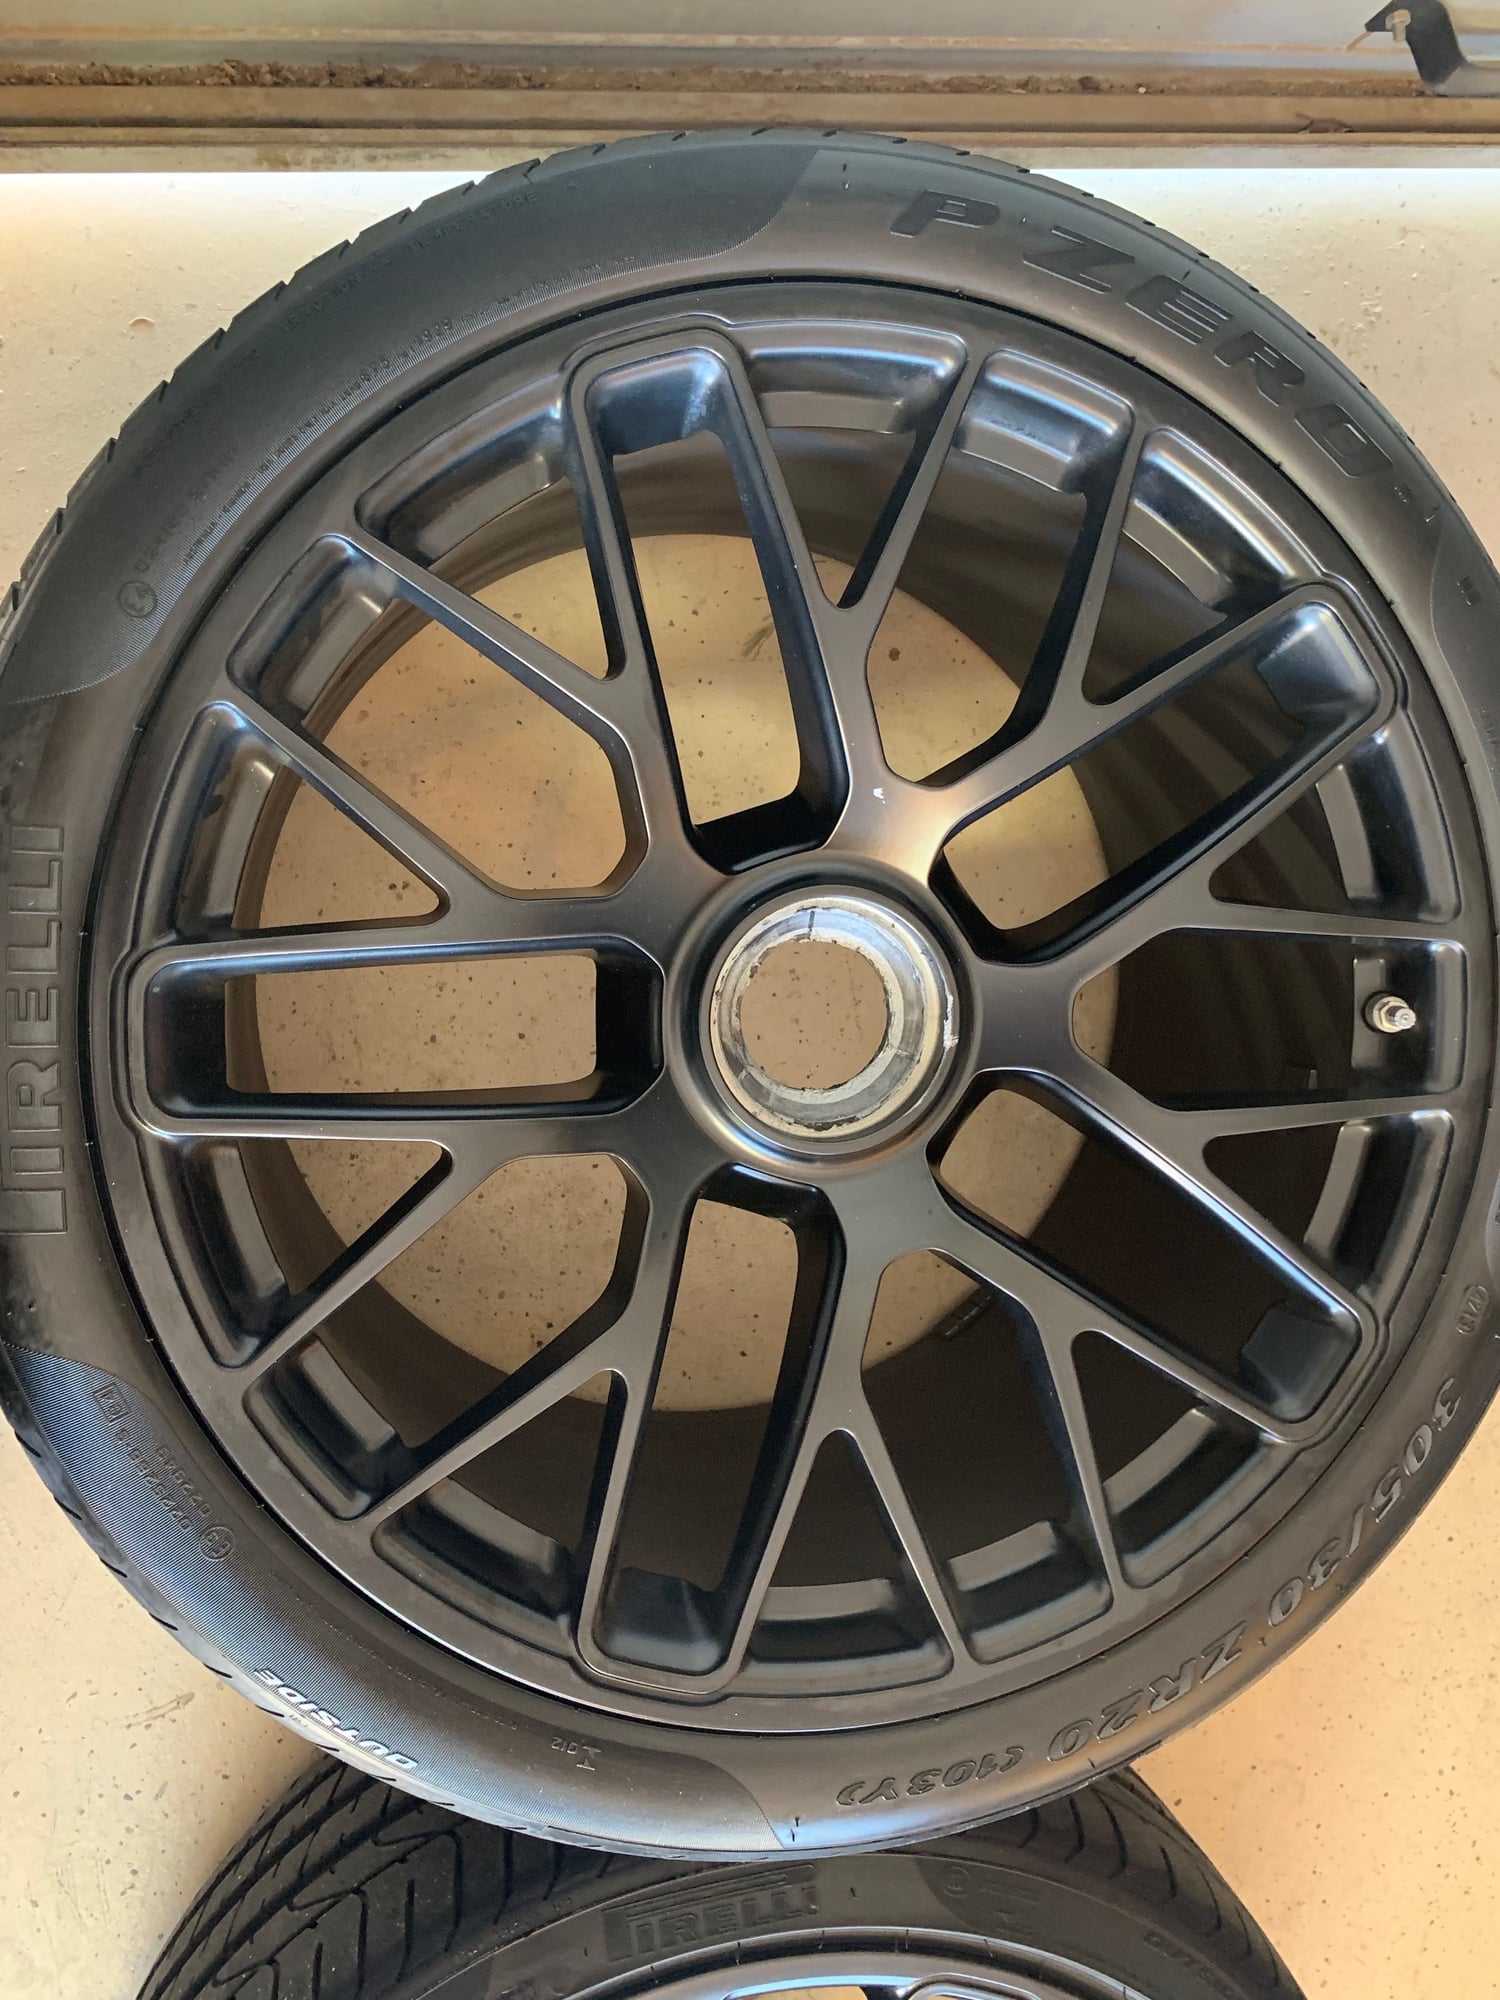 Wheels and Tires/Axles - 991 Turbo S Wheels finished in matte black w/ Tires - Used - 2014 to 2018 Porsche 911 - Scottsdale, AZ 85258, United States